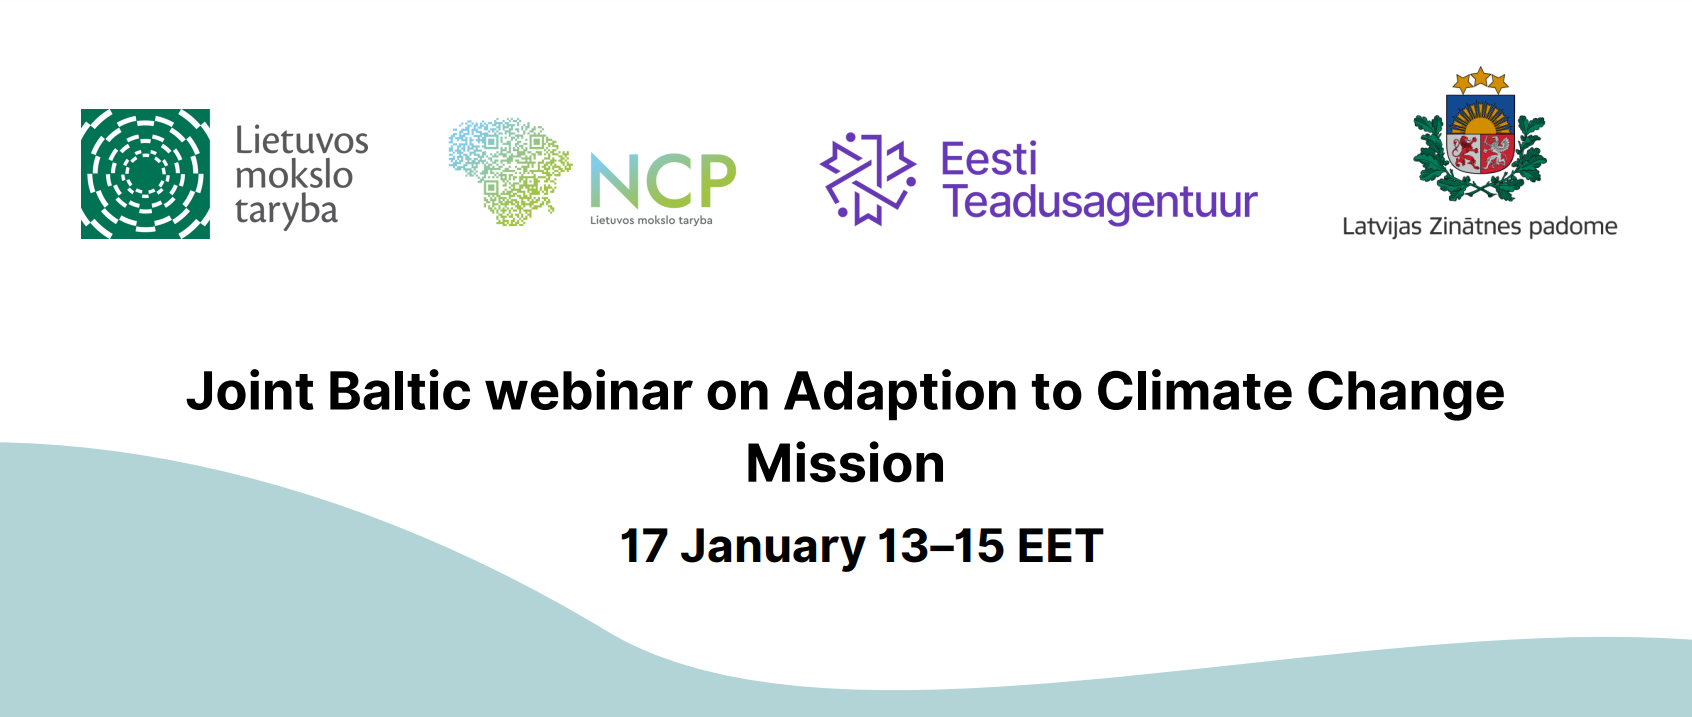 Joint Baltic webinar on Adaptation to Climate Change Mission